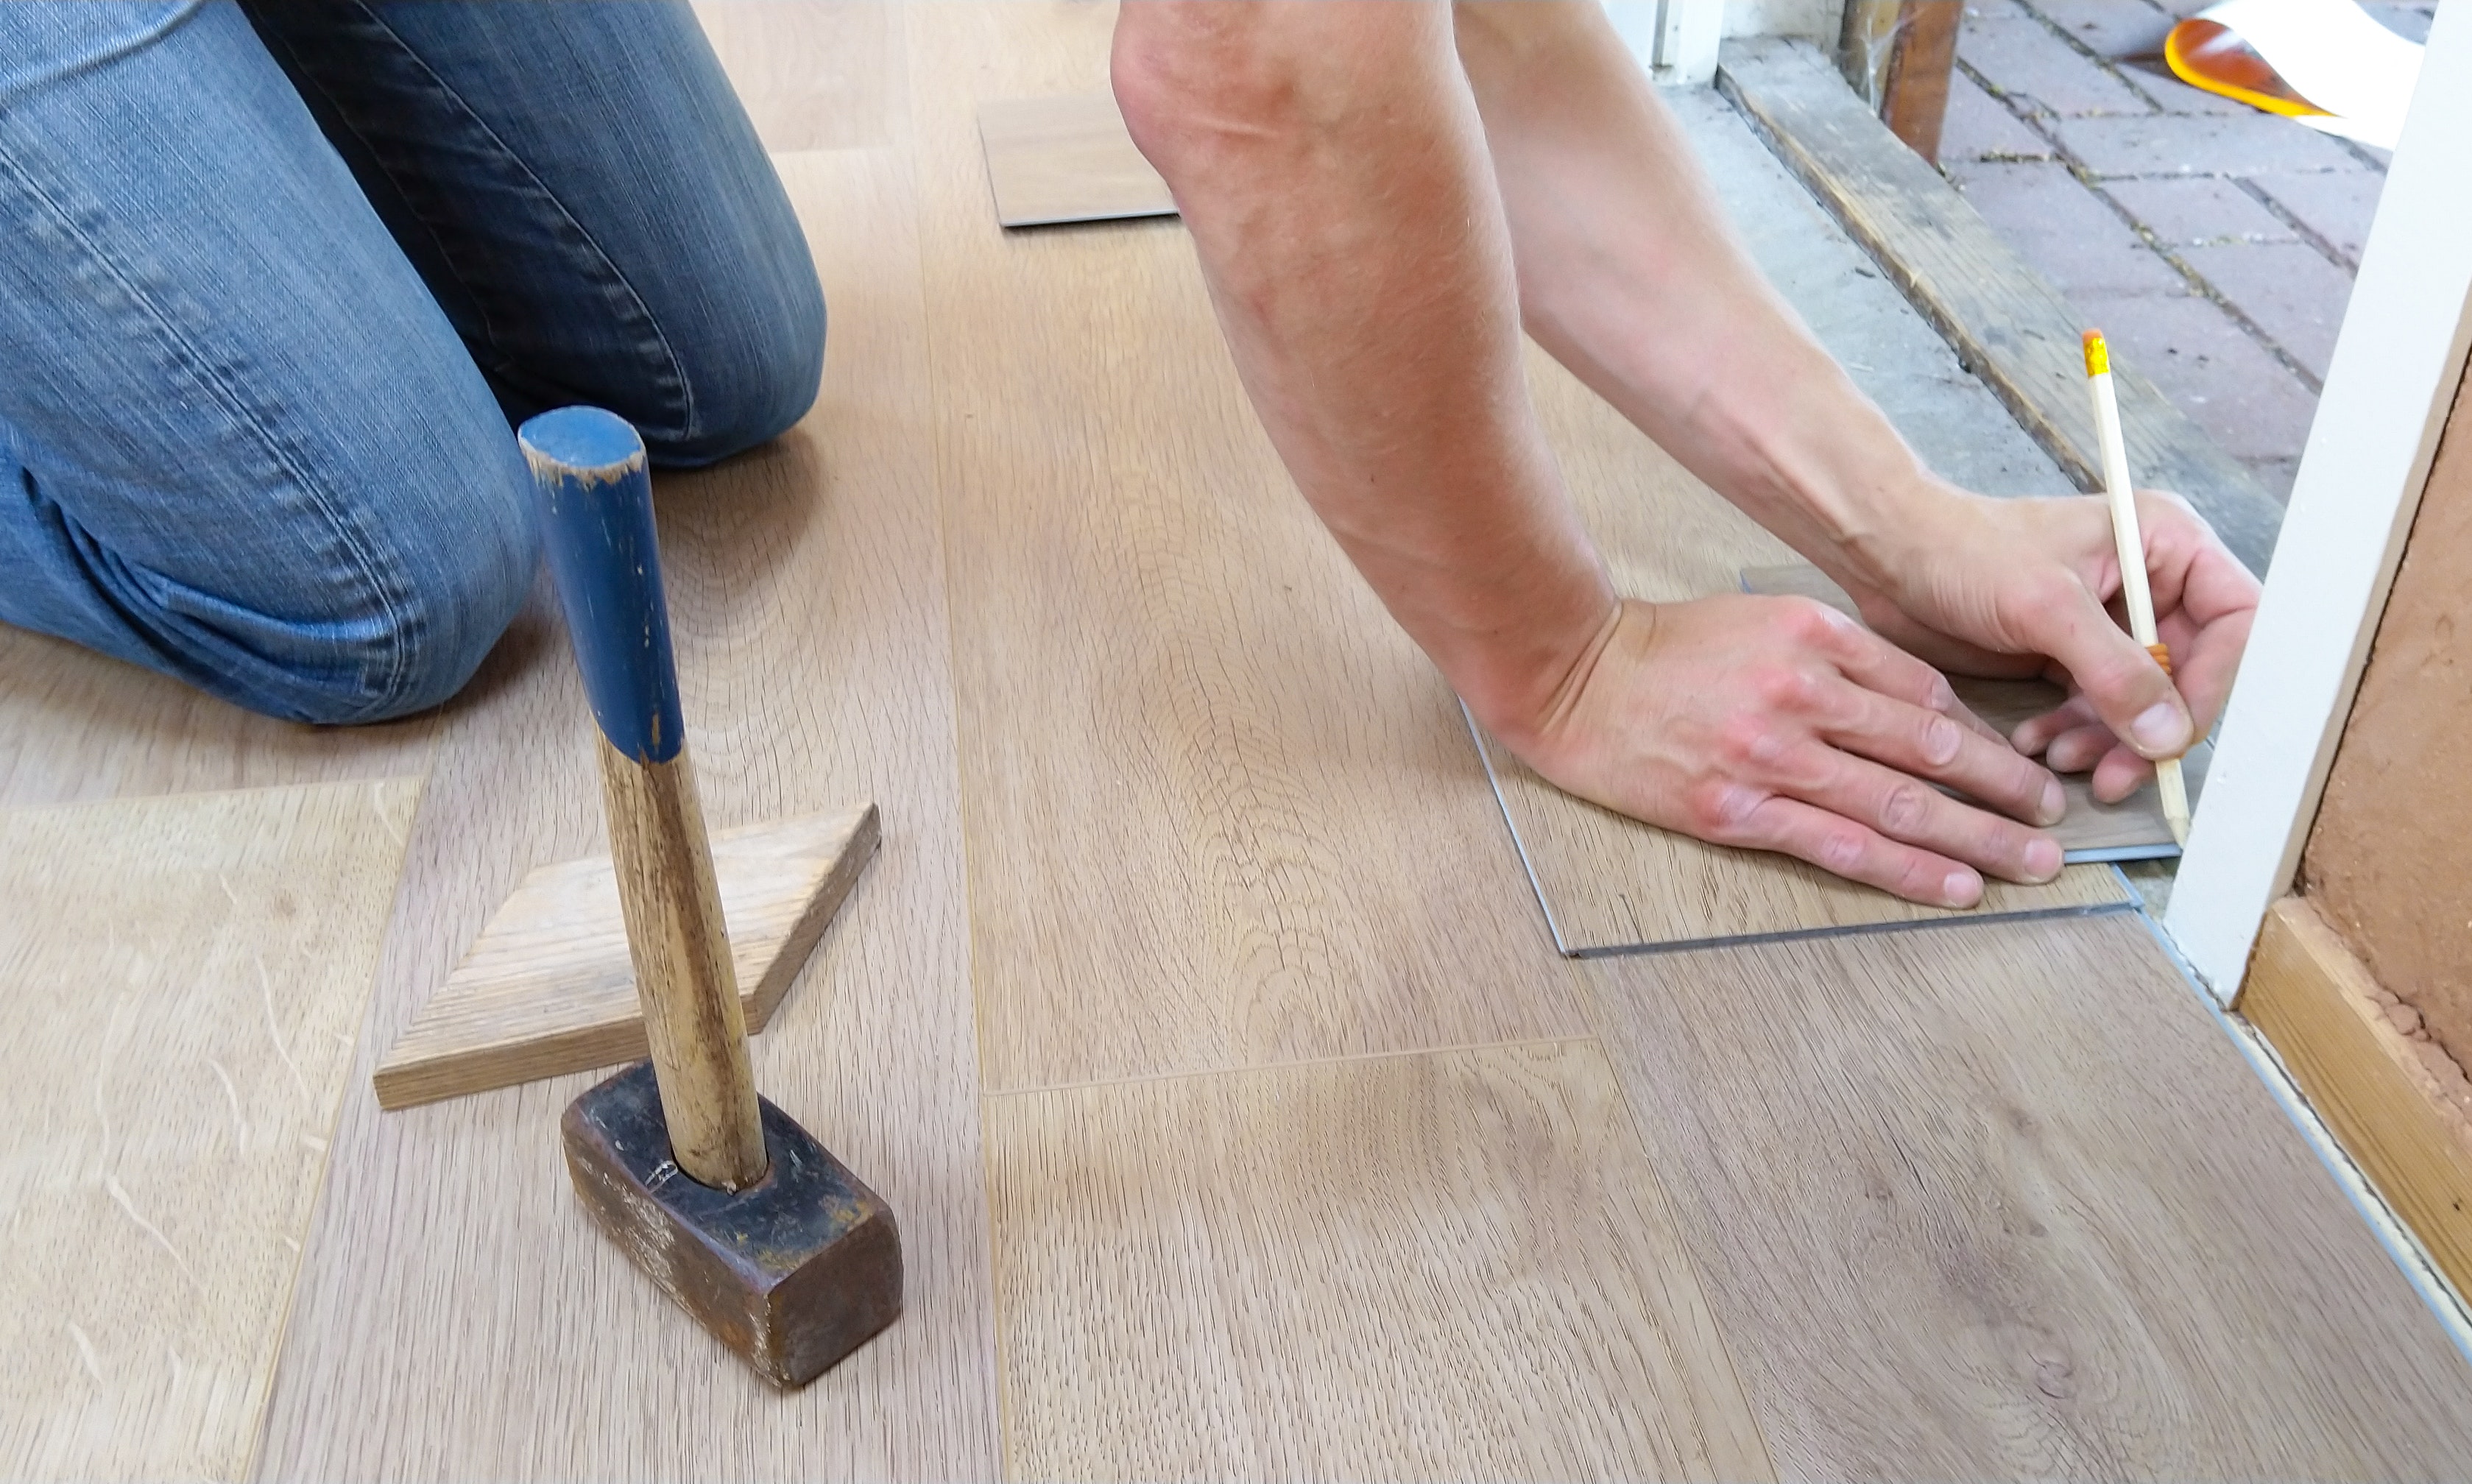 Installing a Carpet Underlay Yourself, Guide to Fitting Underlay